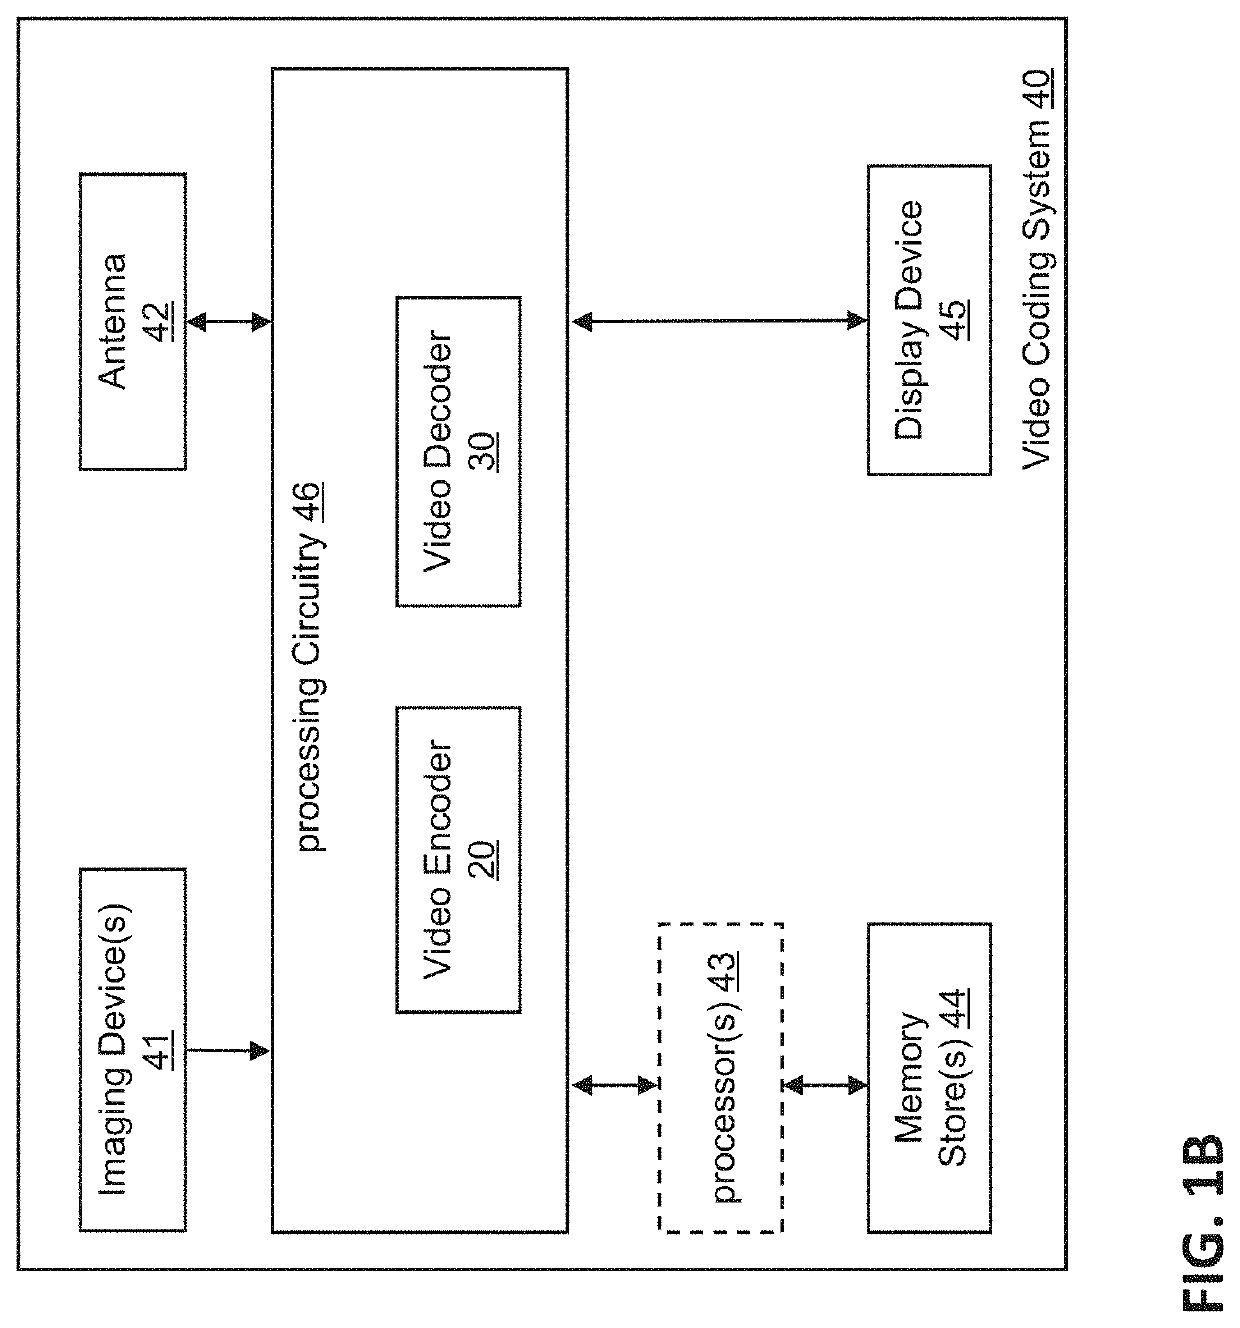 Encoder, a decoder and corresponding methods using ibc search range optimization for arbitrary ctu size